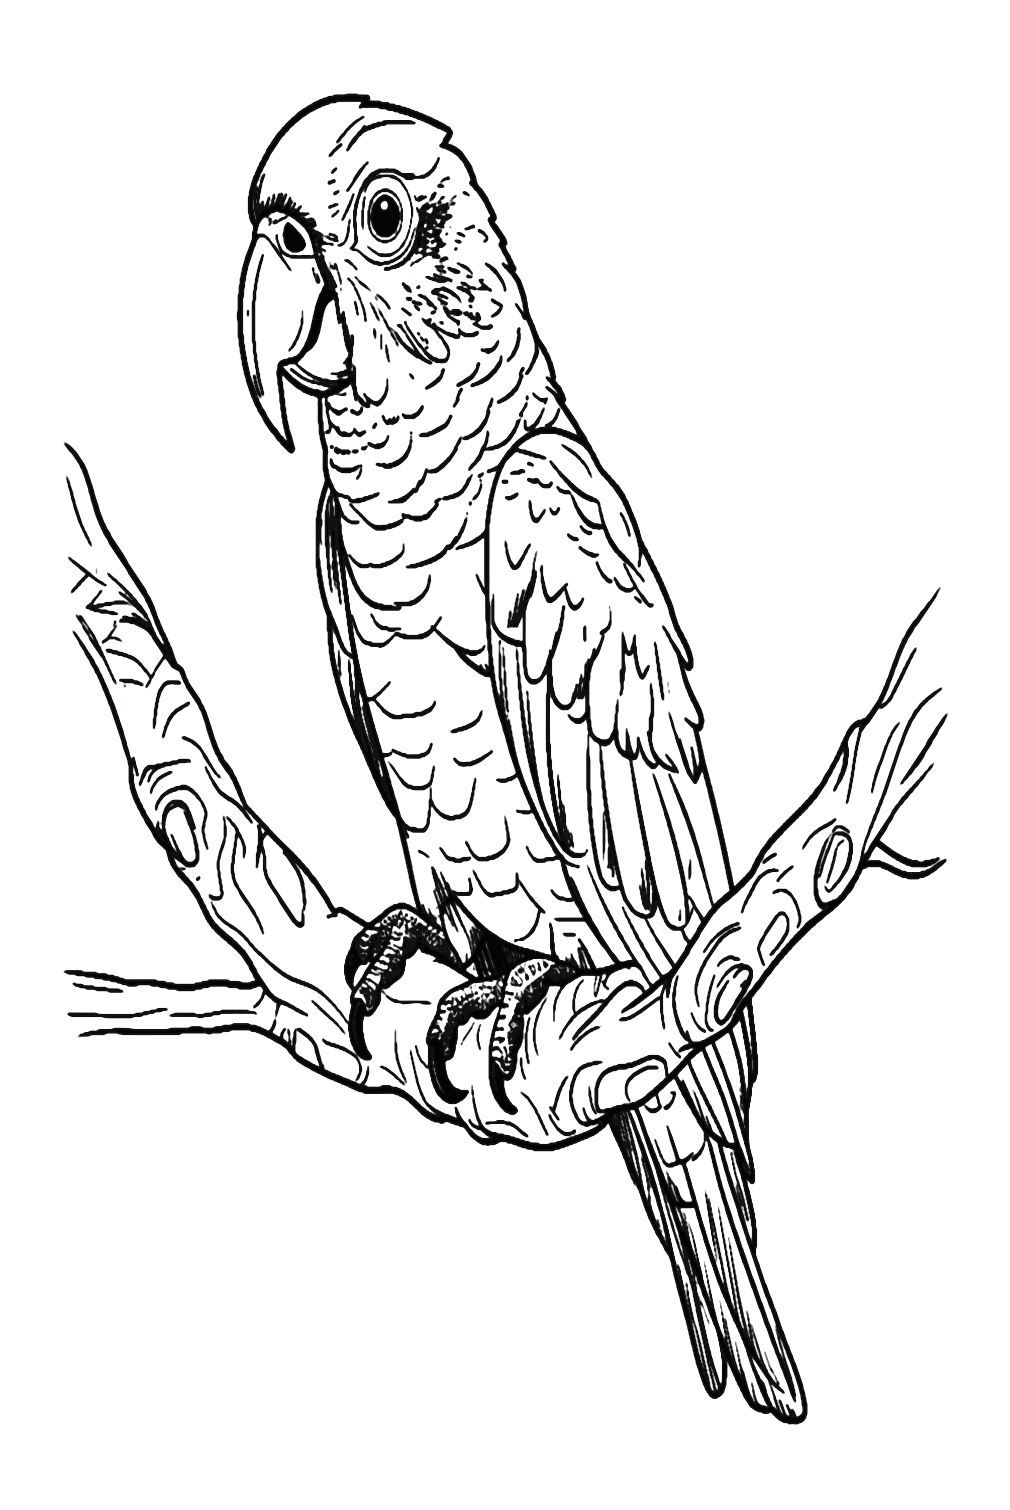 Parakeet Picture To Color from Parakeet